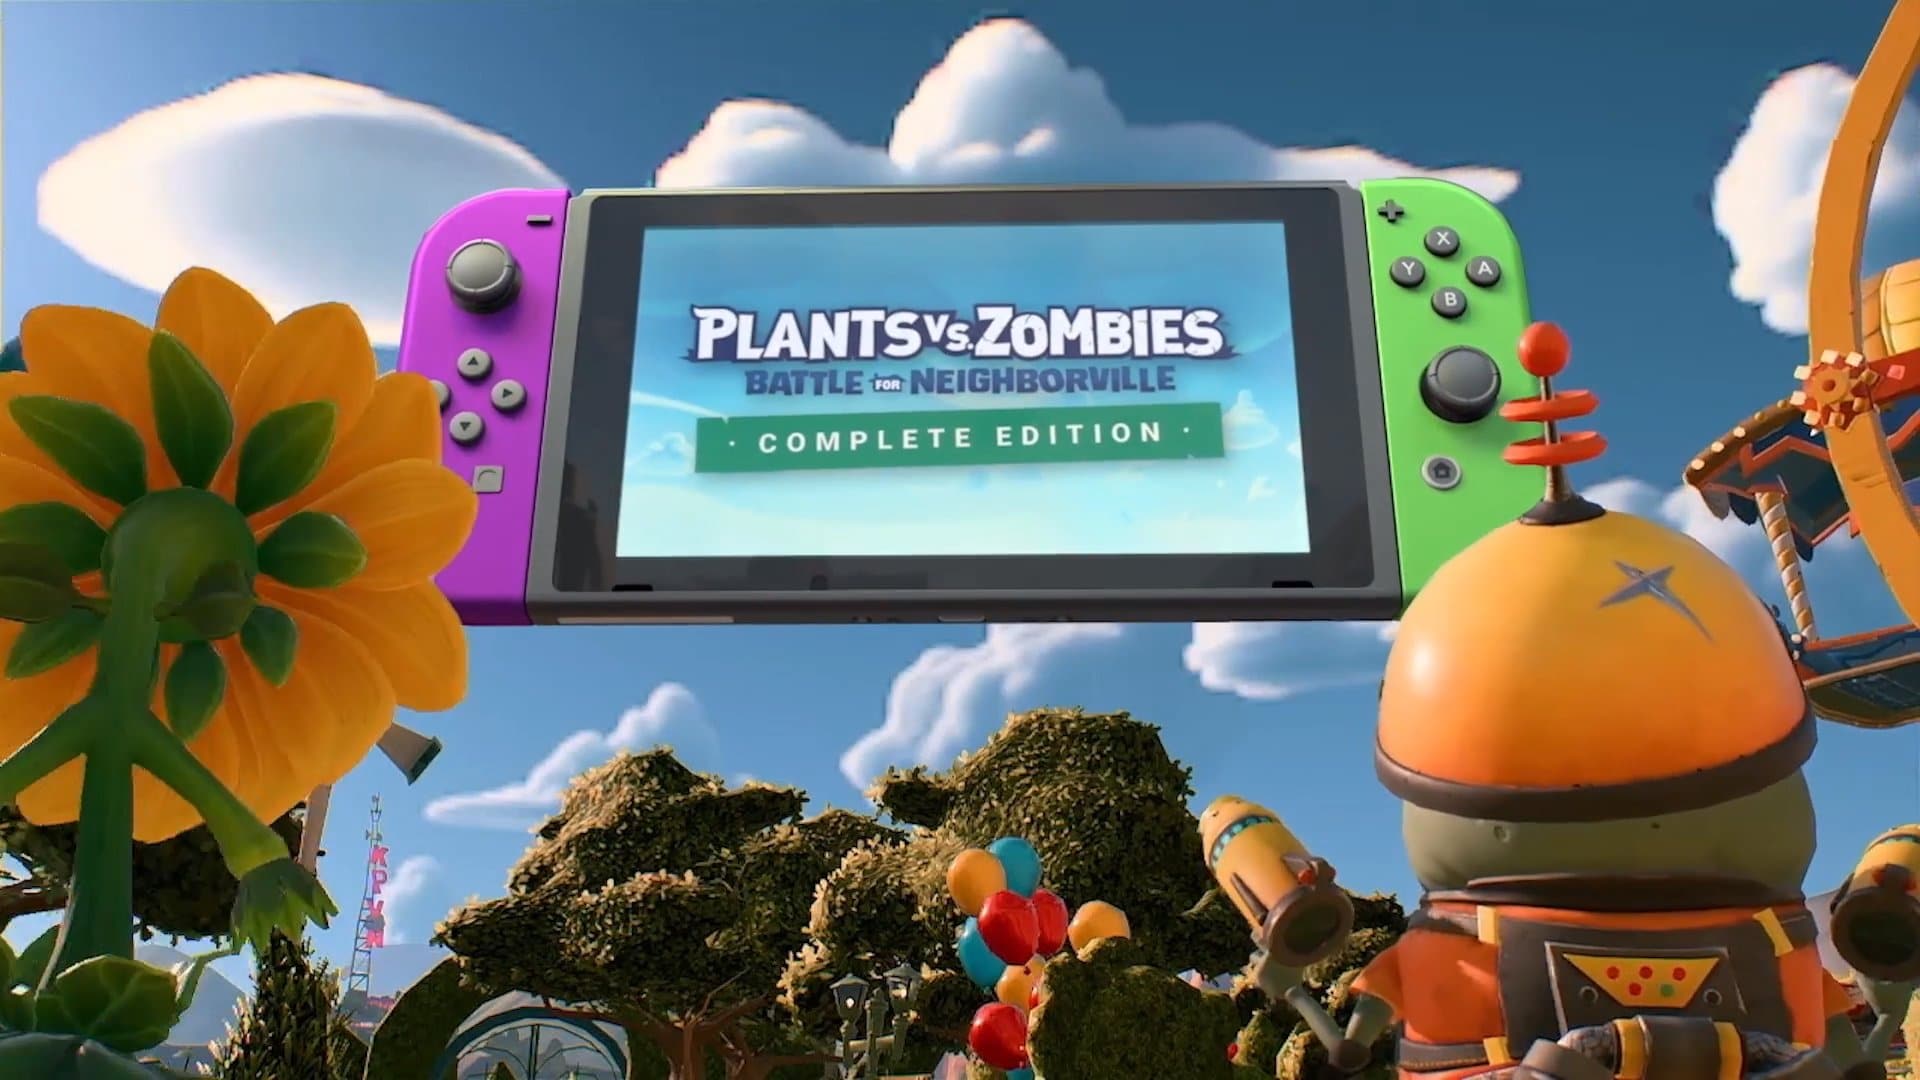 Plants vs. Zombies: Battle for Neighborville – Complete Edition